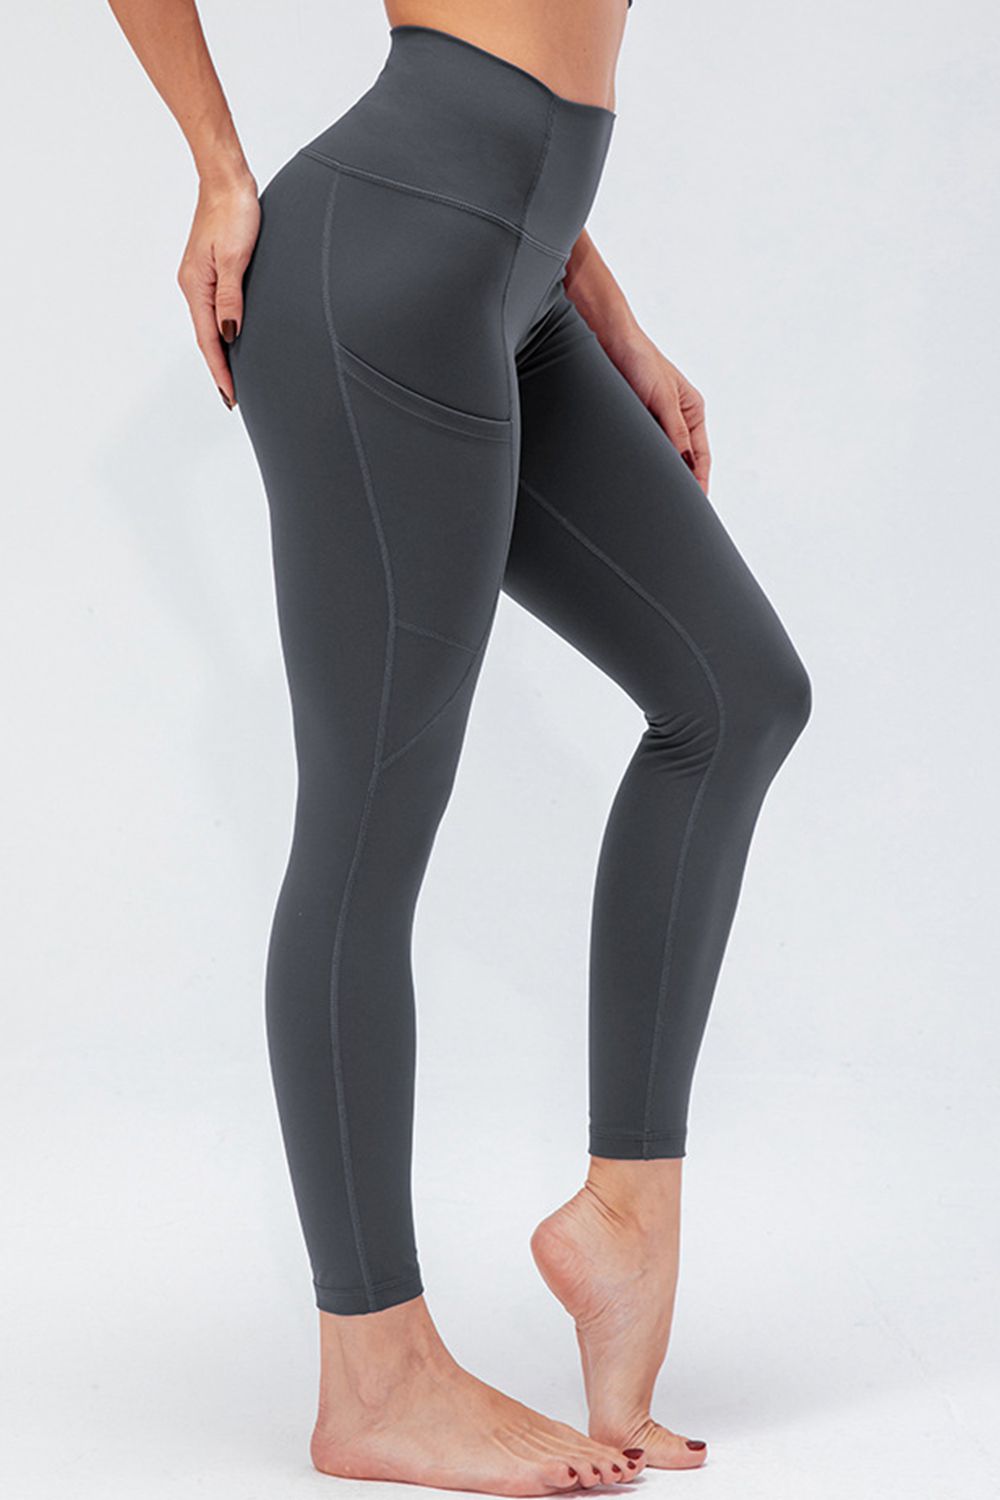 Zyia Active Bill Athletic Leggings for Women